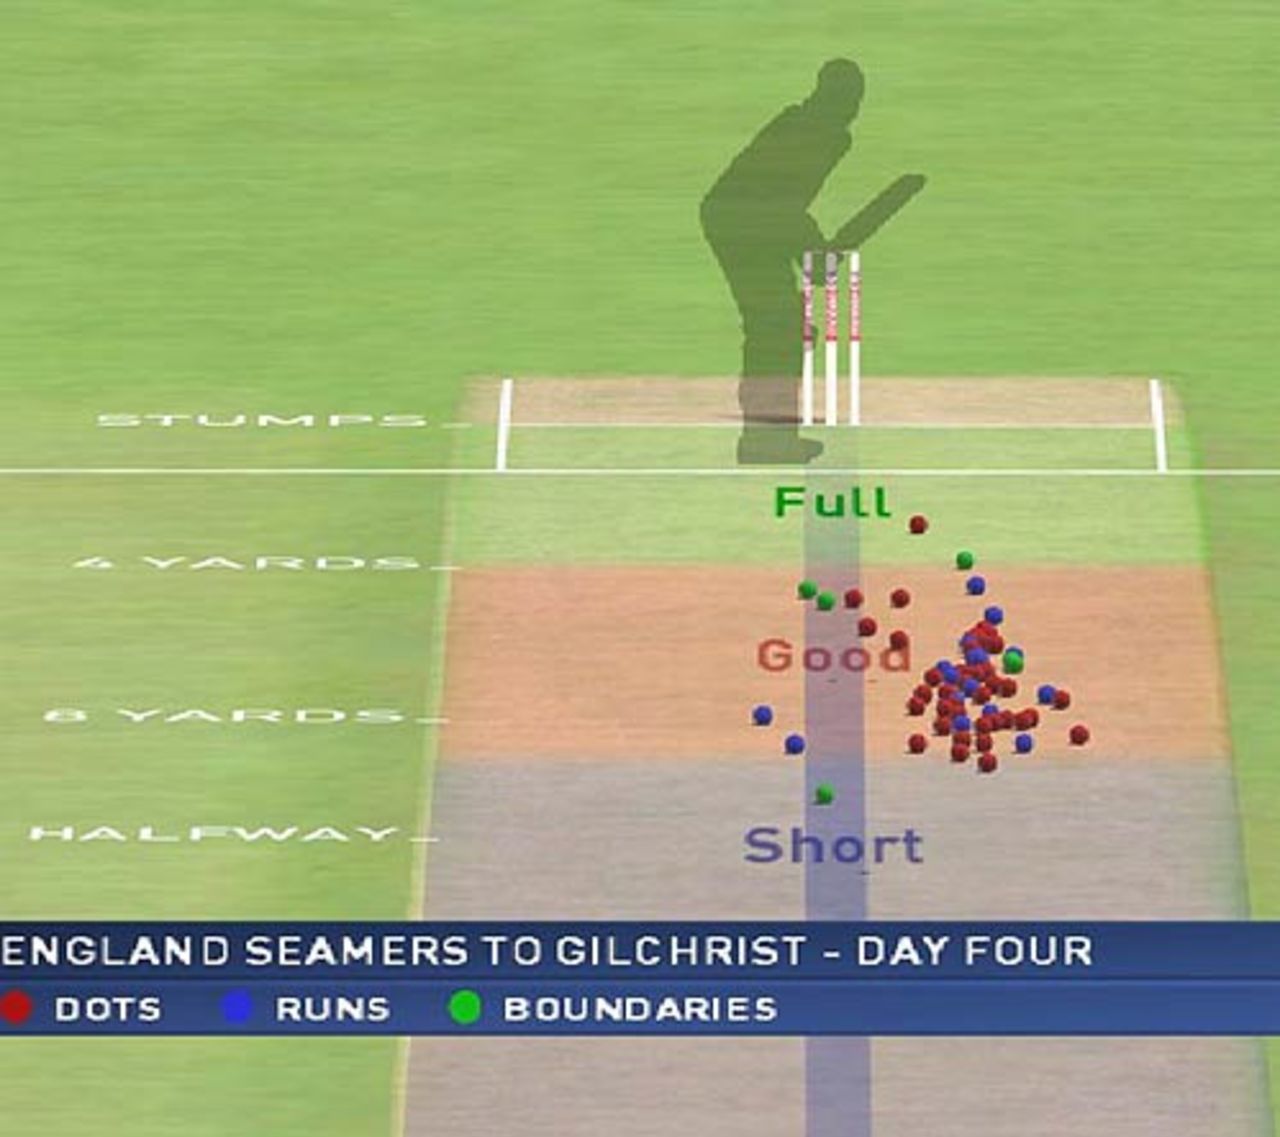 Pitch map of Adam Gilchrist's first innings, Australia v England, 2nd Test, Adelaide, December 2006